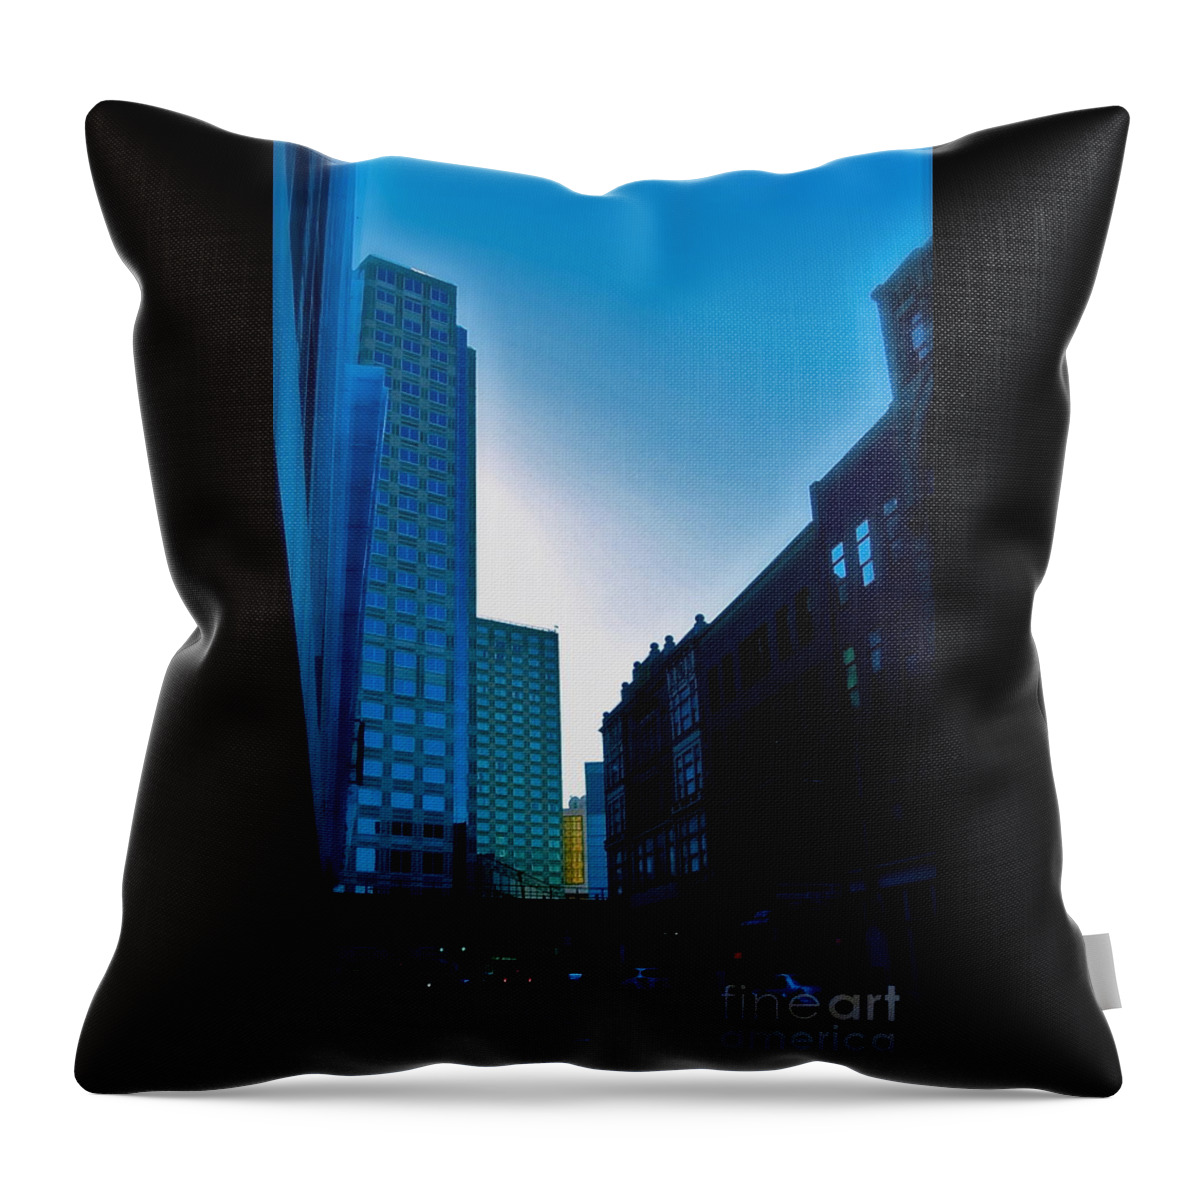 Pittsburgh Throw Pillow featuring the photograph Dark Urban Streets by LeLa Becker